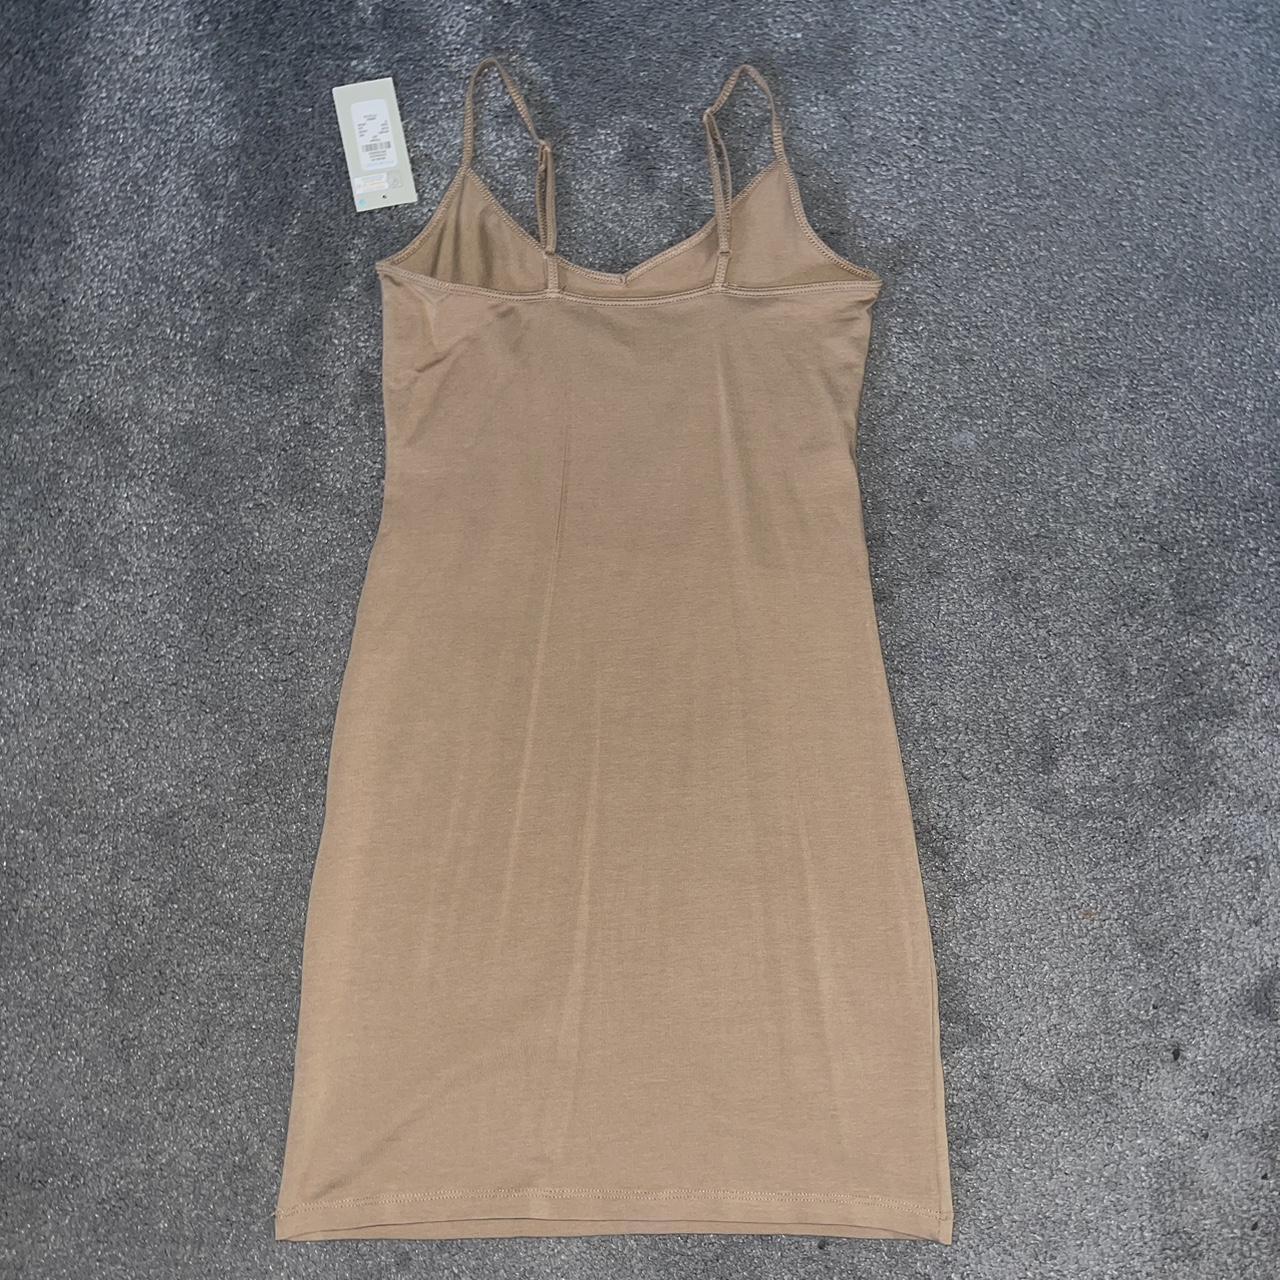 brown primark dress new with tags size XS - Depop